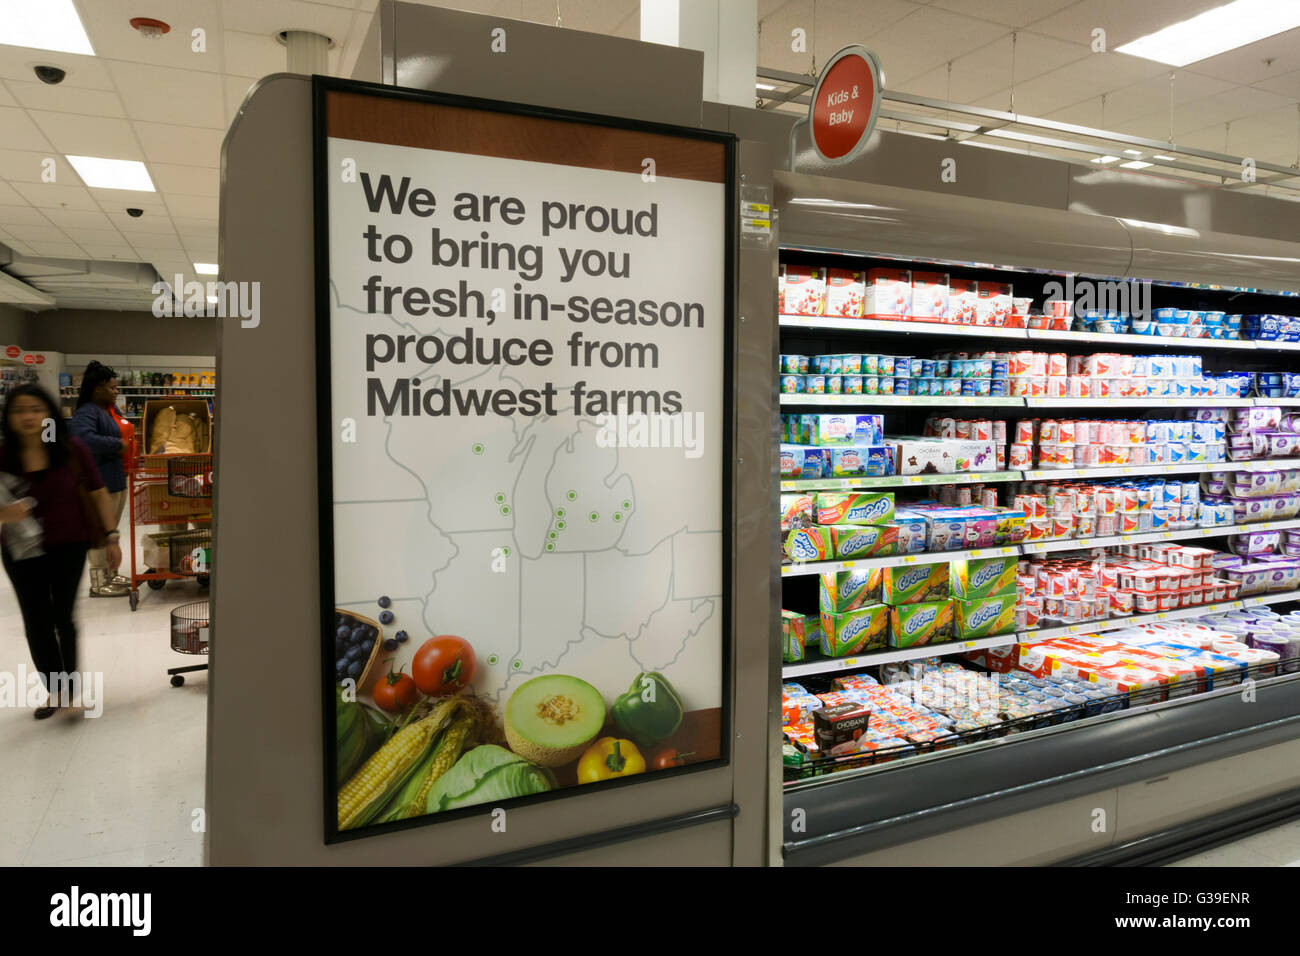 A sign advertising Midwest farm food in a Target supermarket in Chicago. Stock Photo